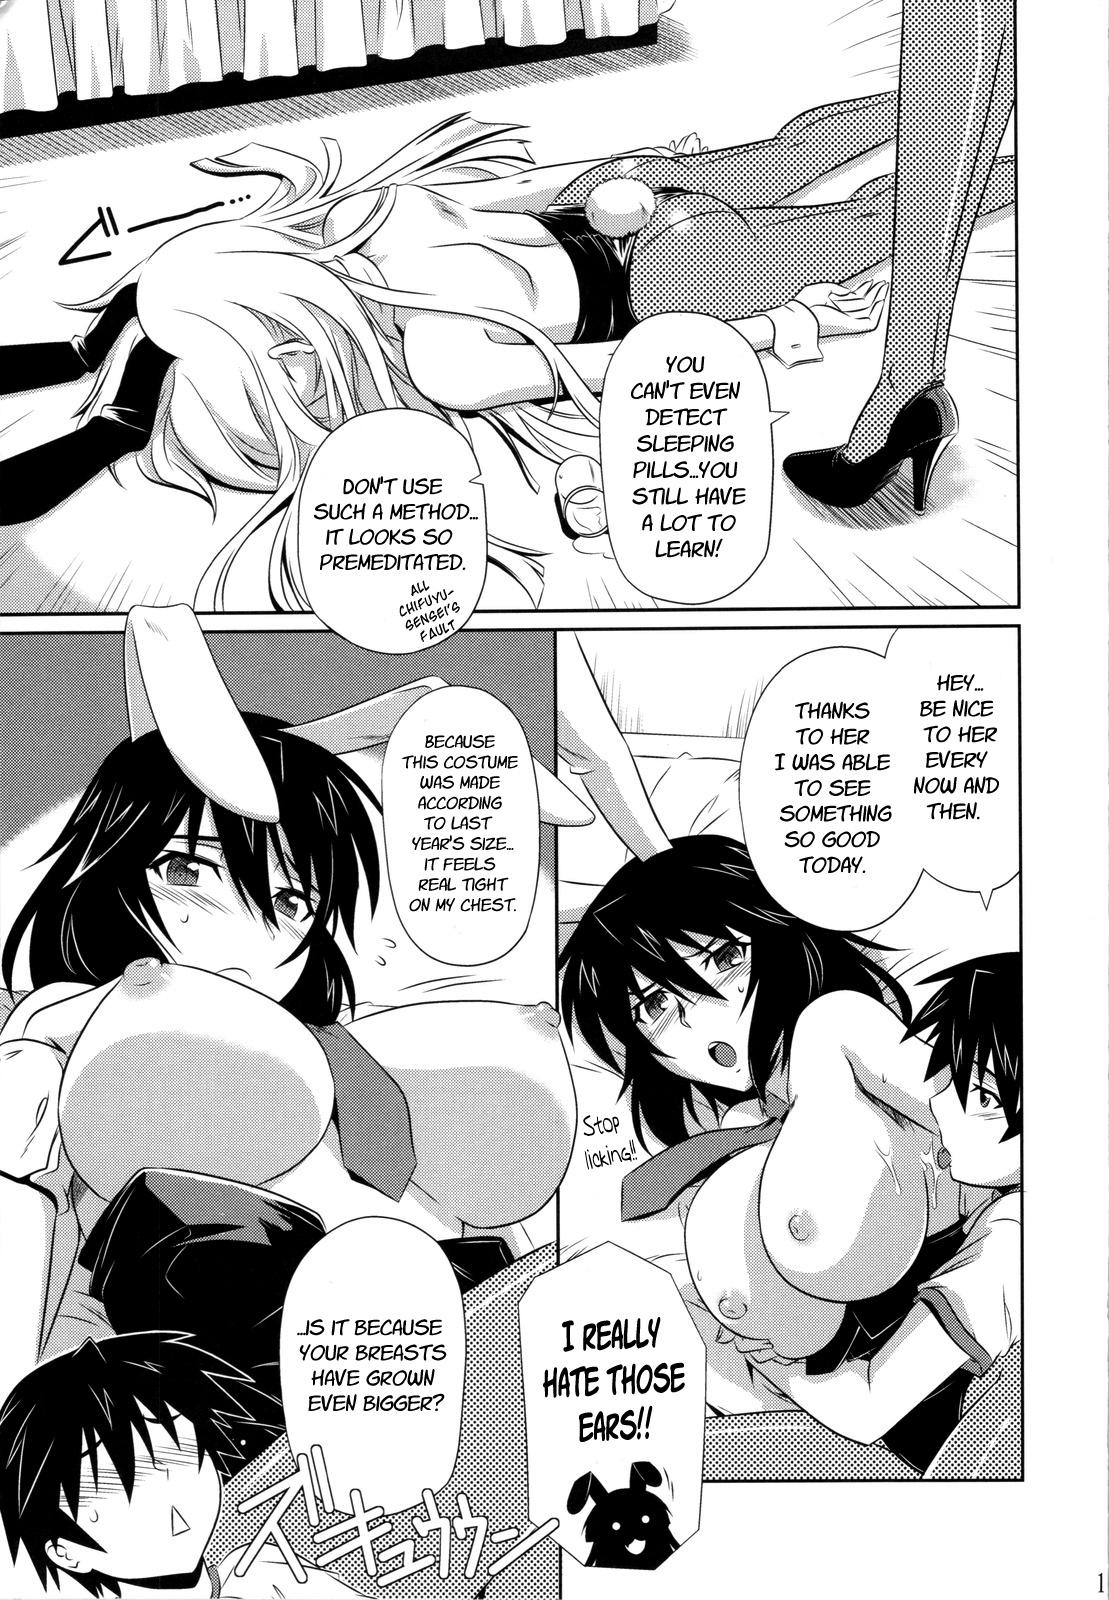 Pussy To Mouth is Incest Strategy 3 - Infinite stratos Load - Page 10